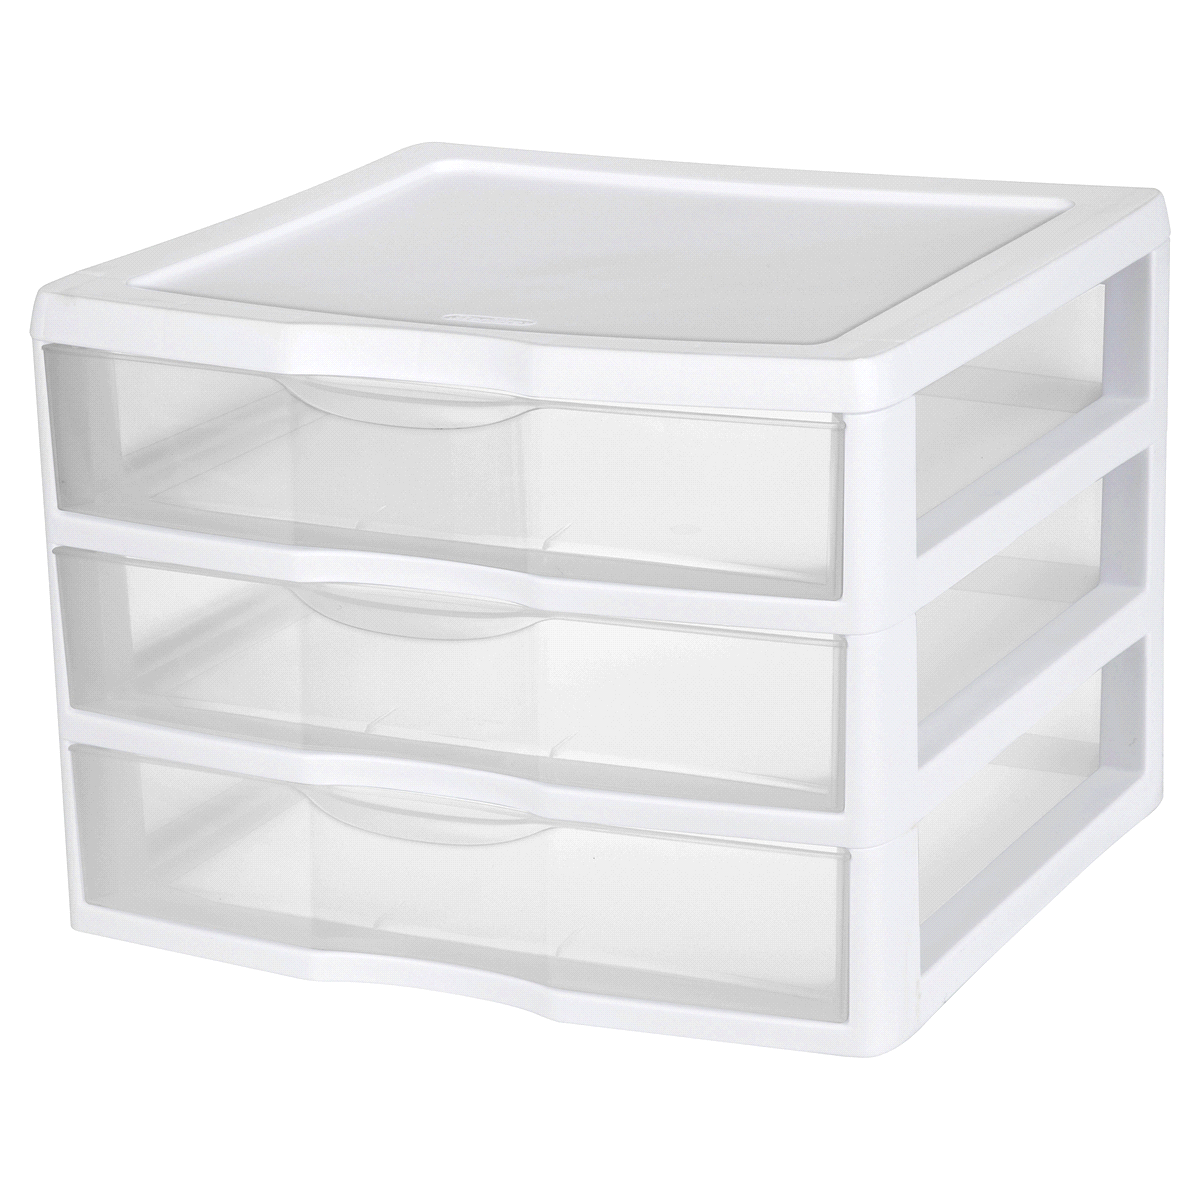 slide 1 of 1, Sterilite Clearview 3-Drawer Wide Organizer 2093 - Clear/White, 1 ct